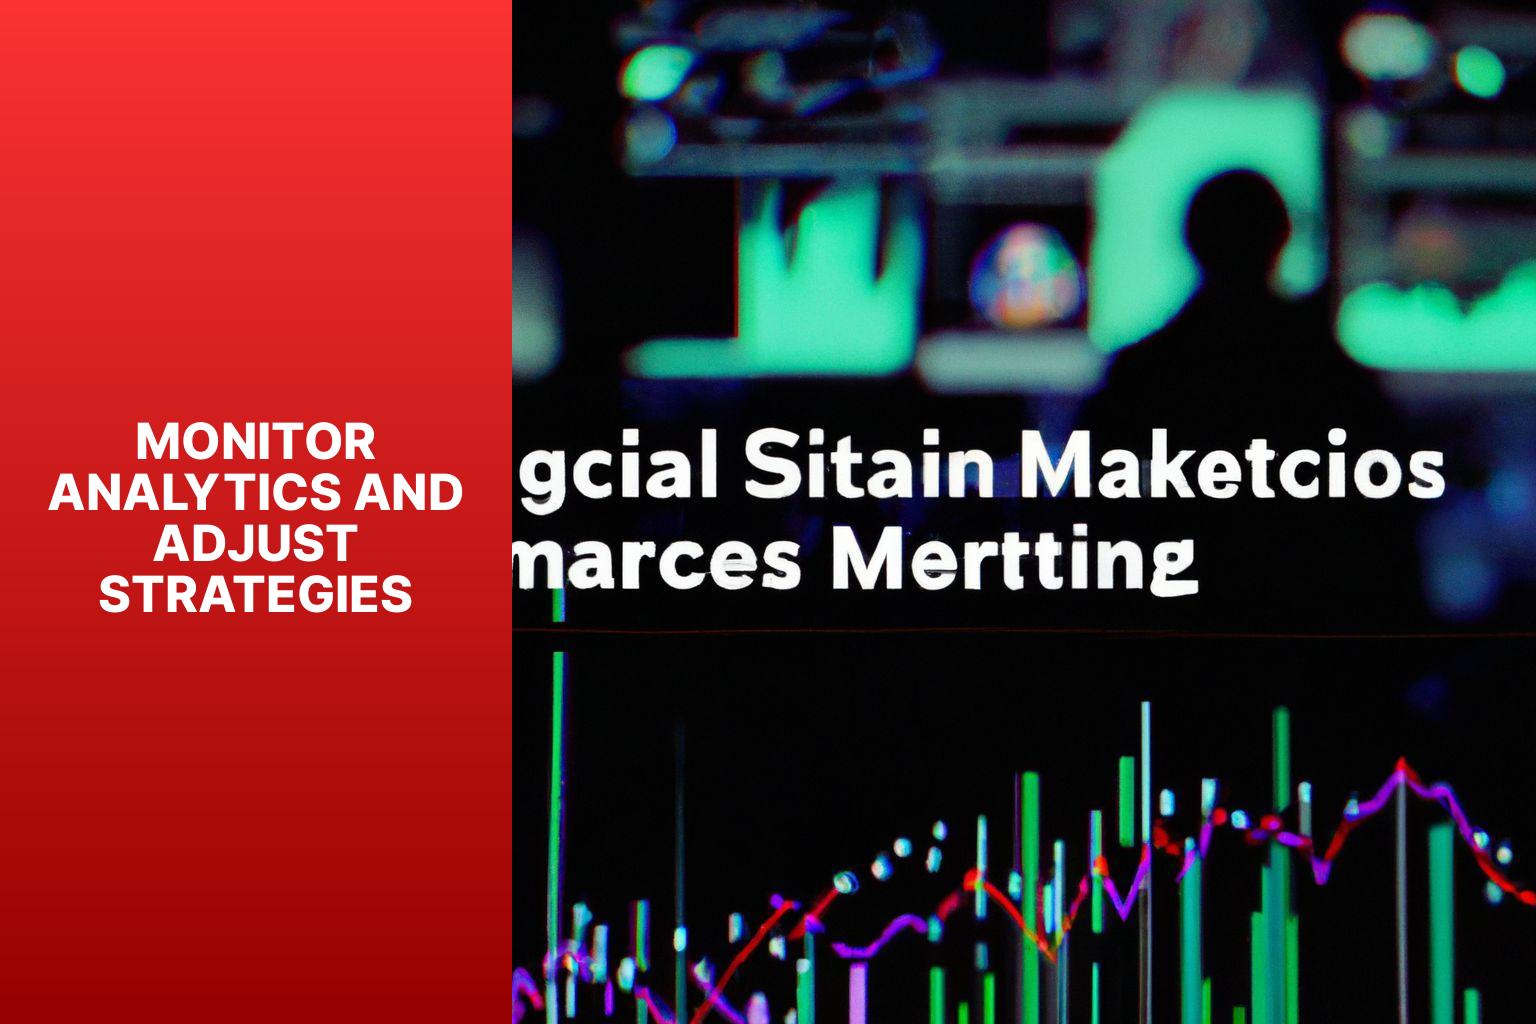 Monitor Analytics and Adjust Strategies - Emerging Social Platforms: What SEOs Should Watch 